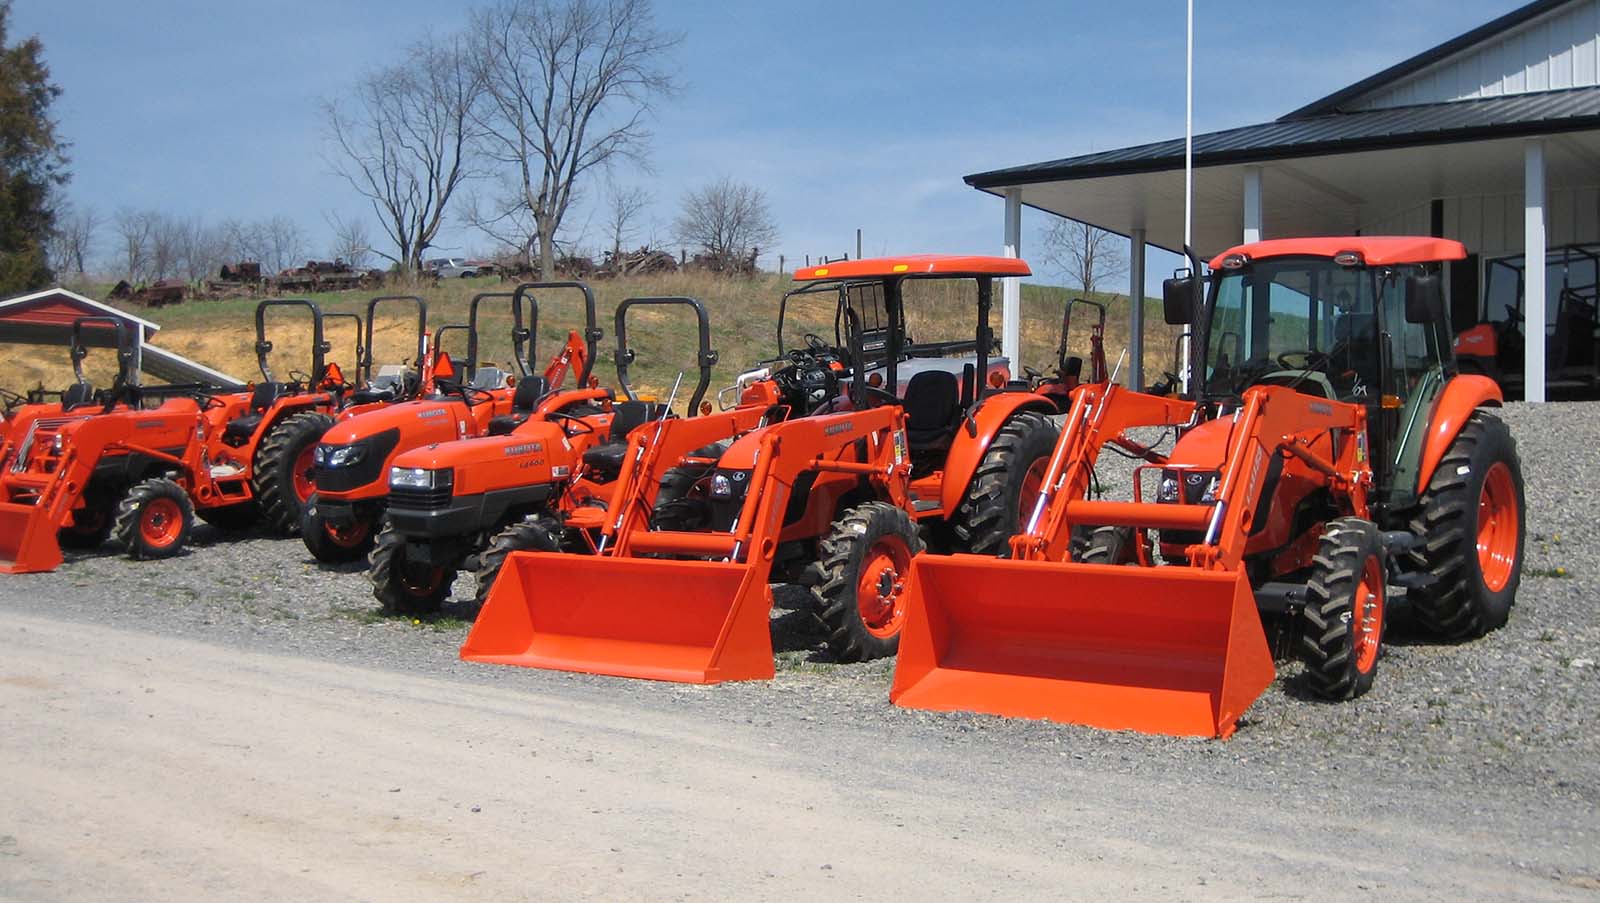 An image of a row of small utility tractors